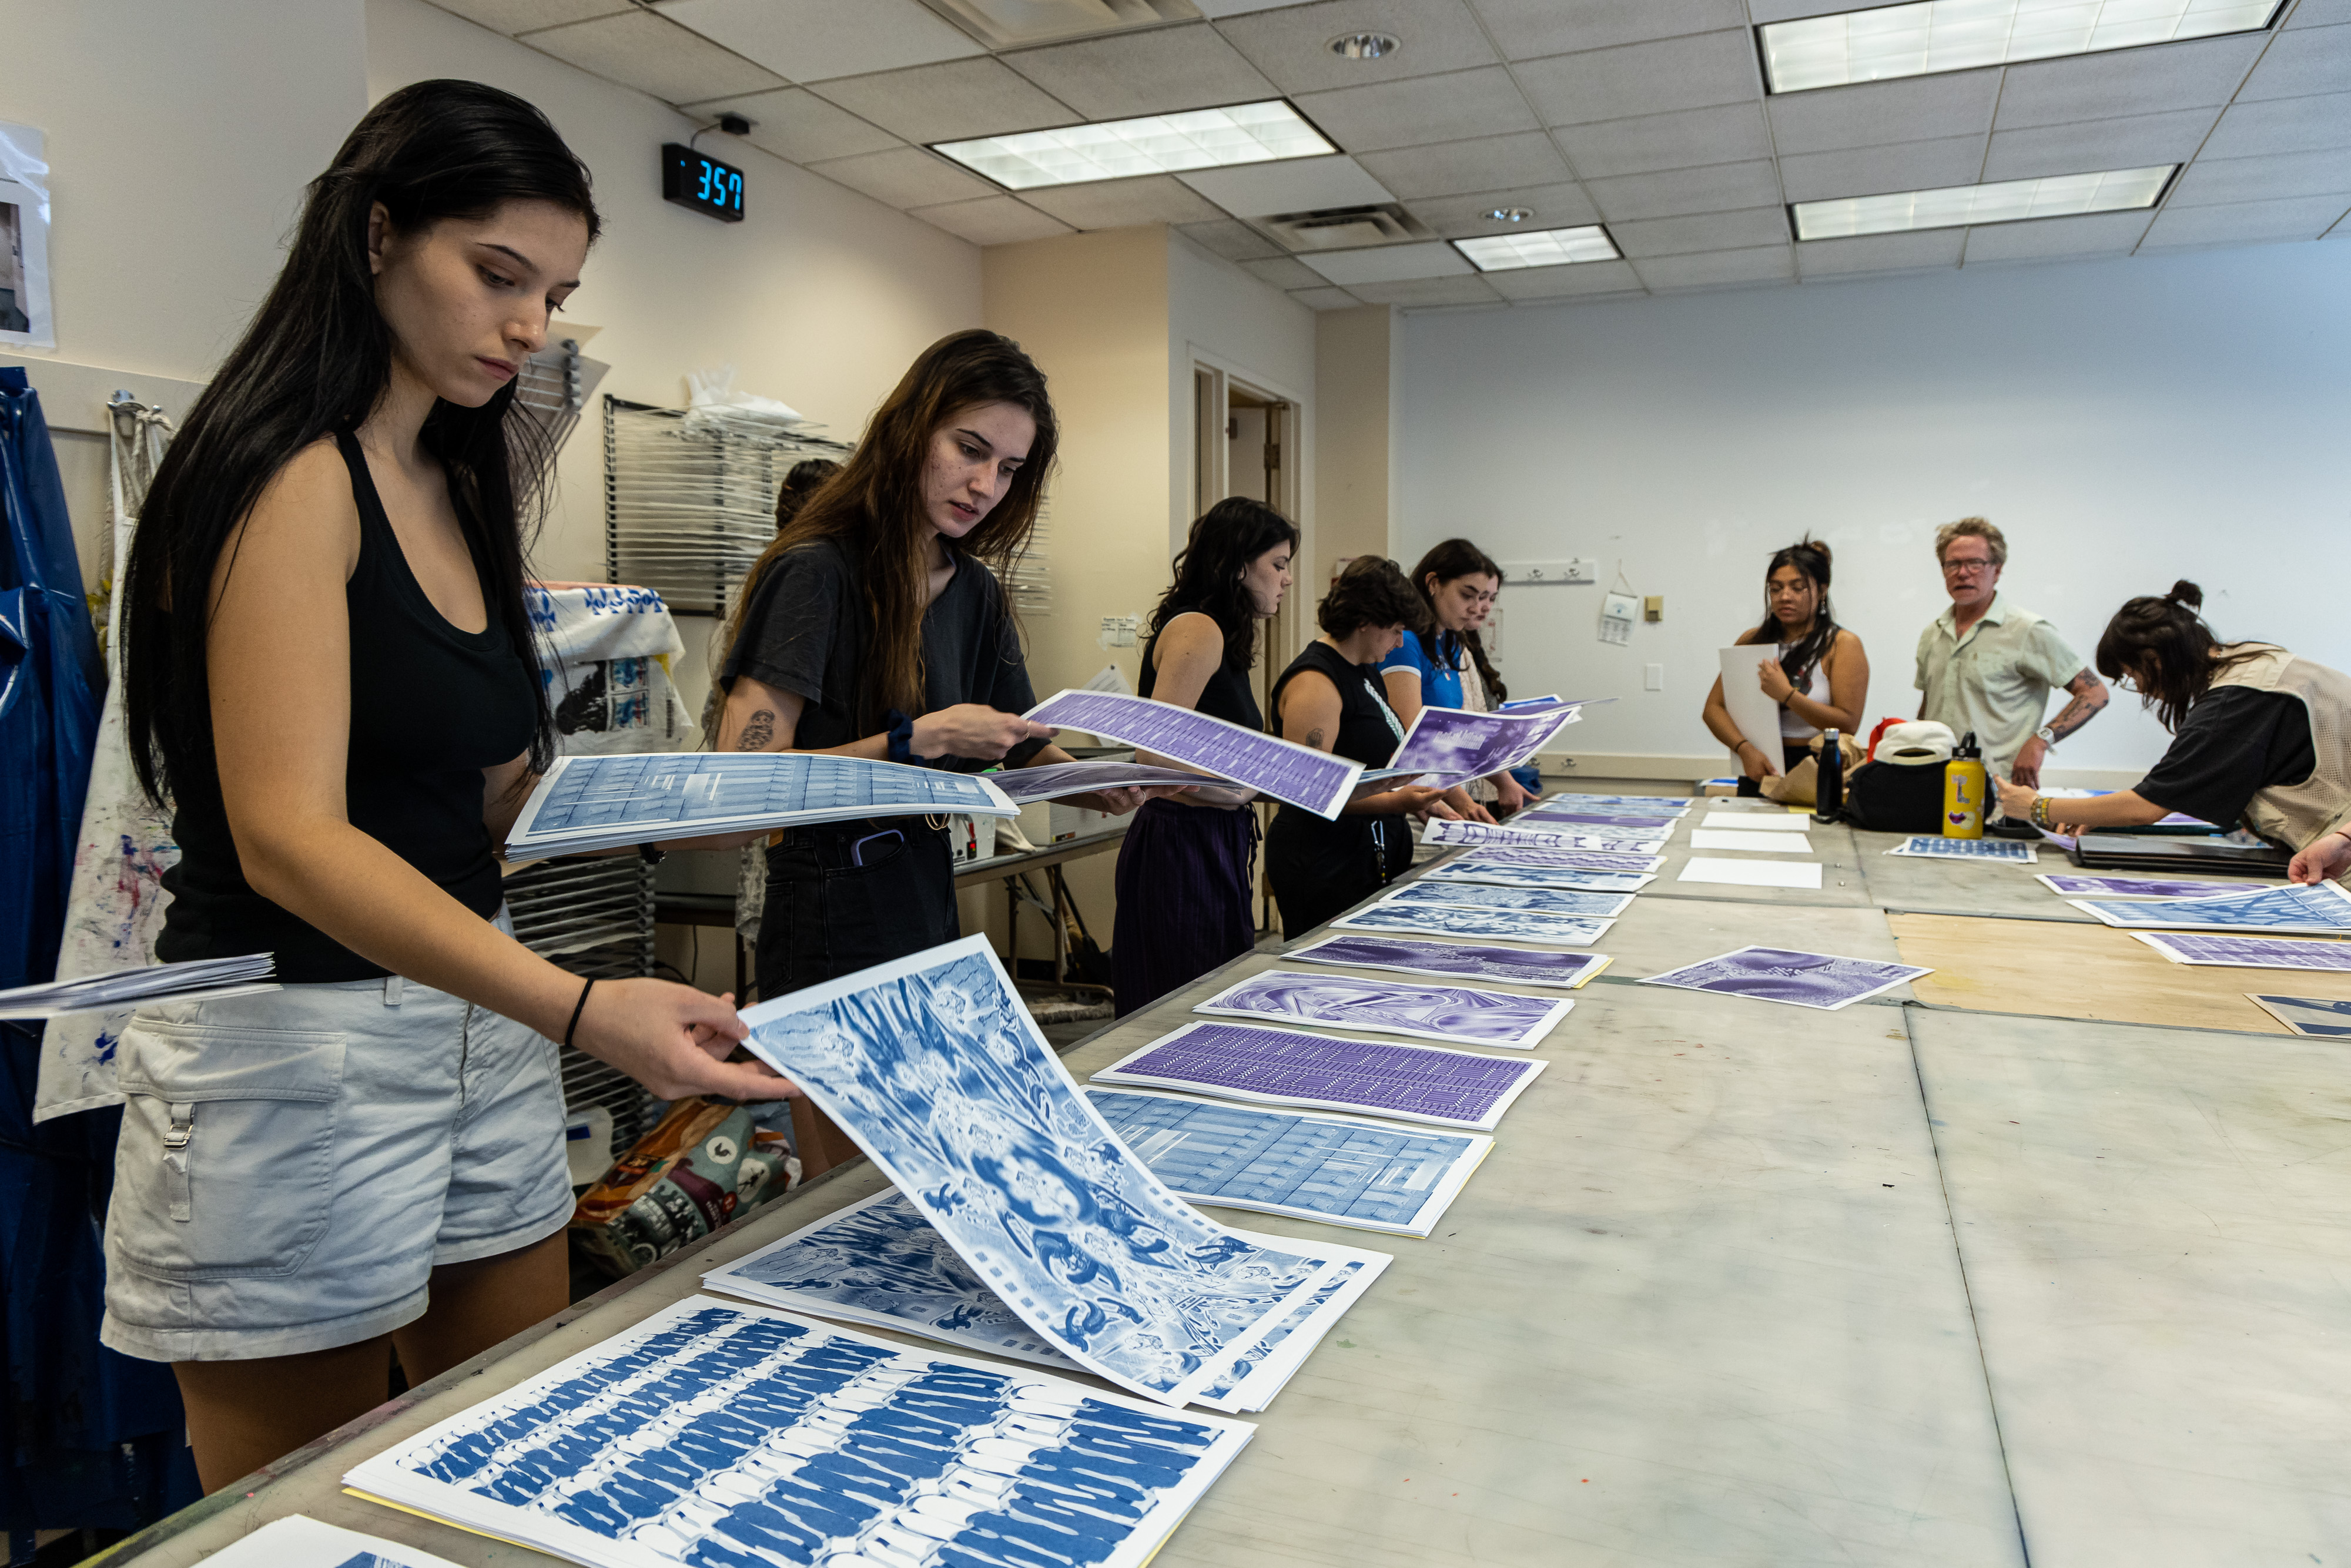 Many students are lined up along a table where they pick up many different prints that are on the table.